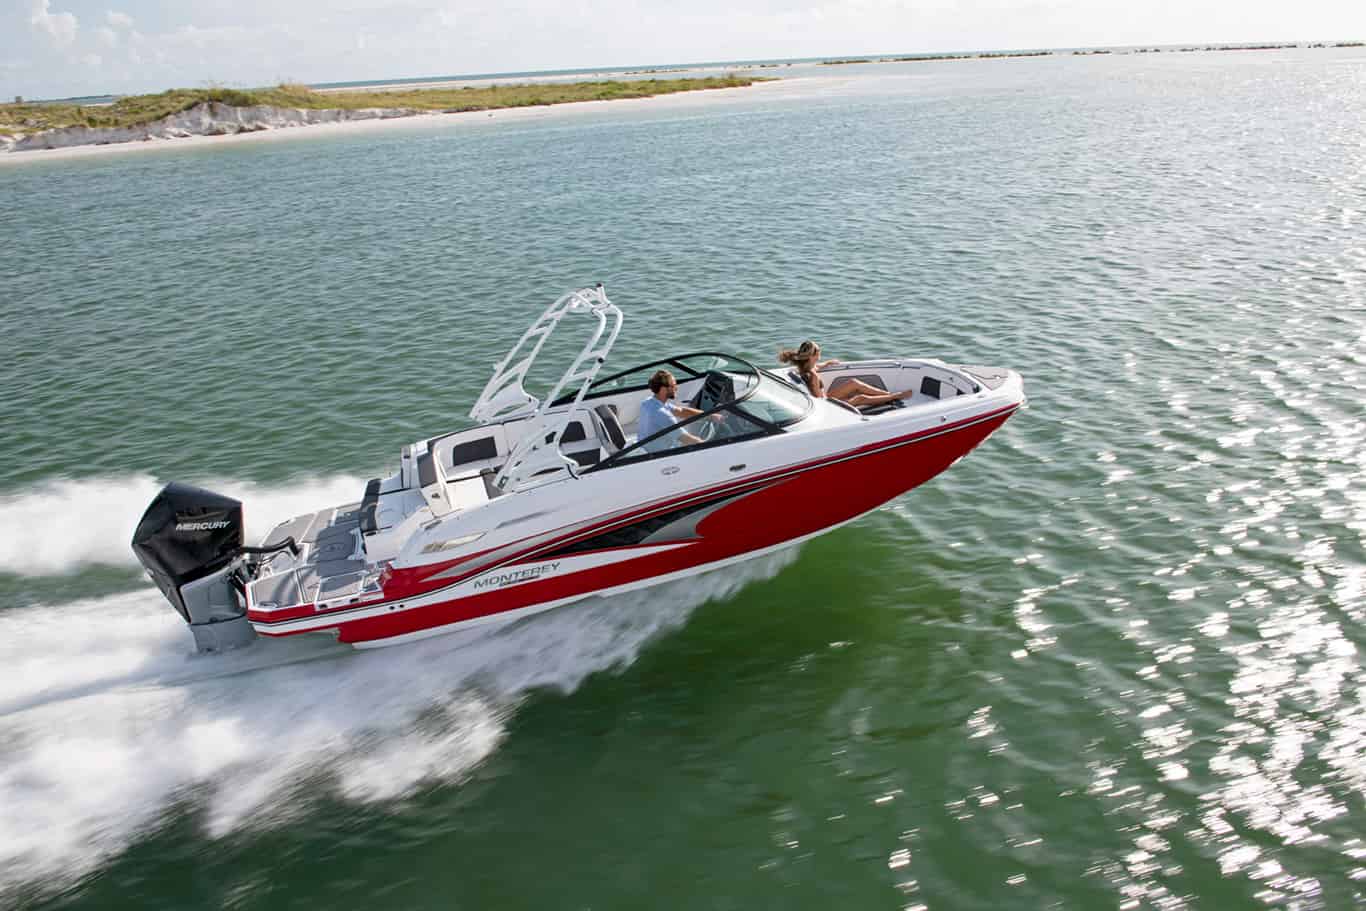 Top Coastal Boats for 2021: Monterey 65